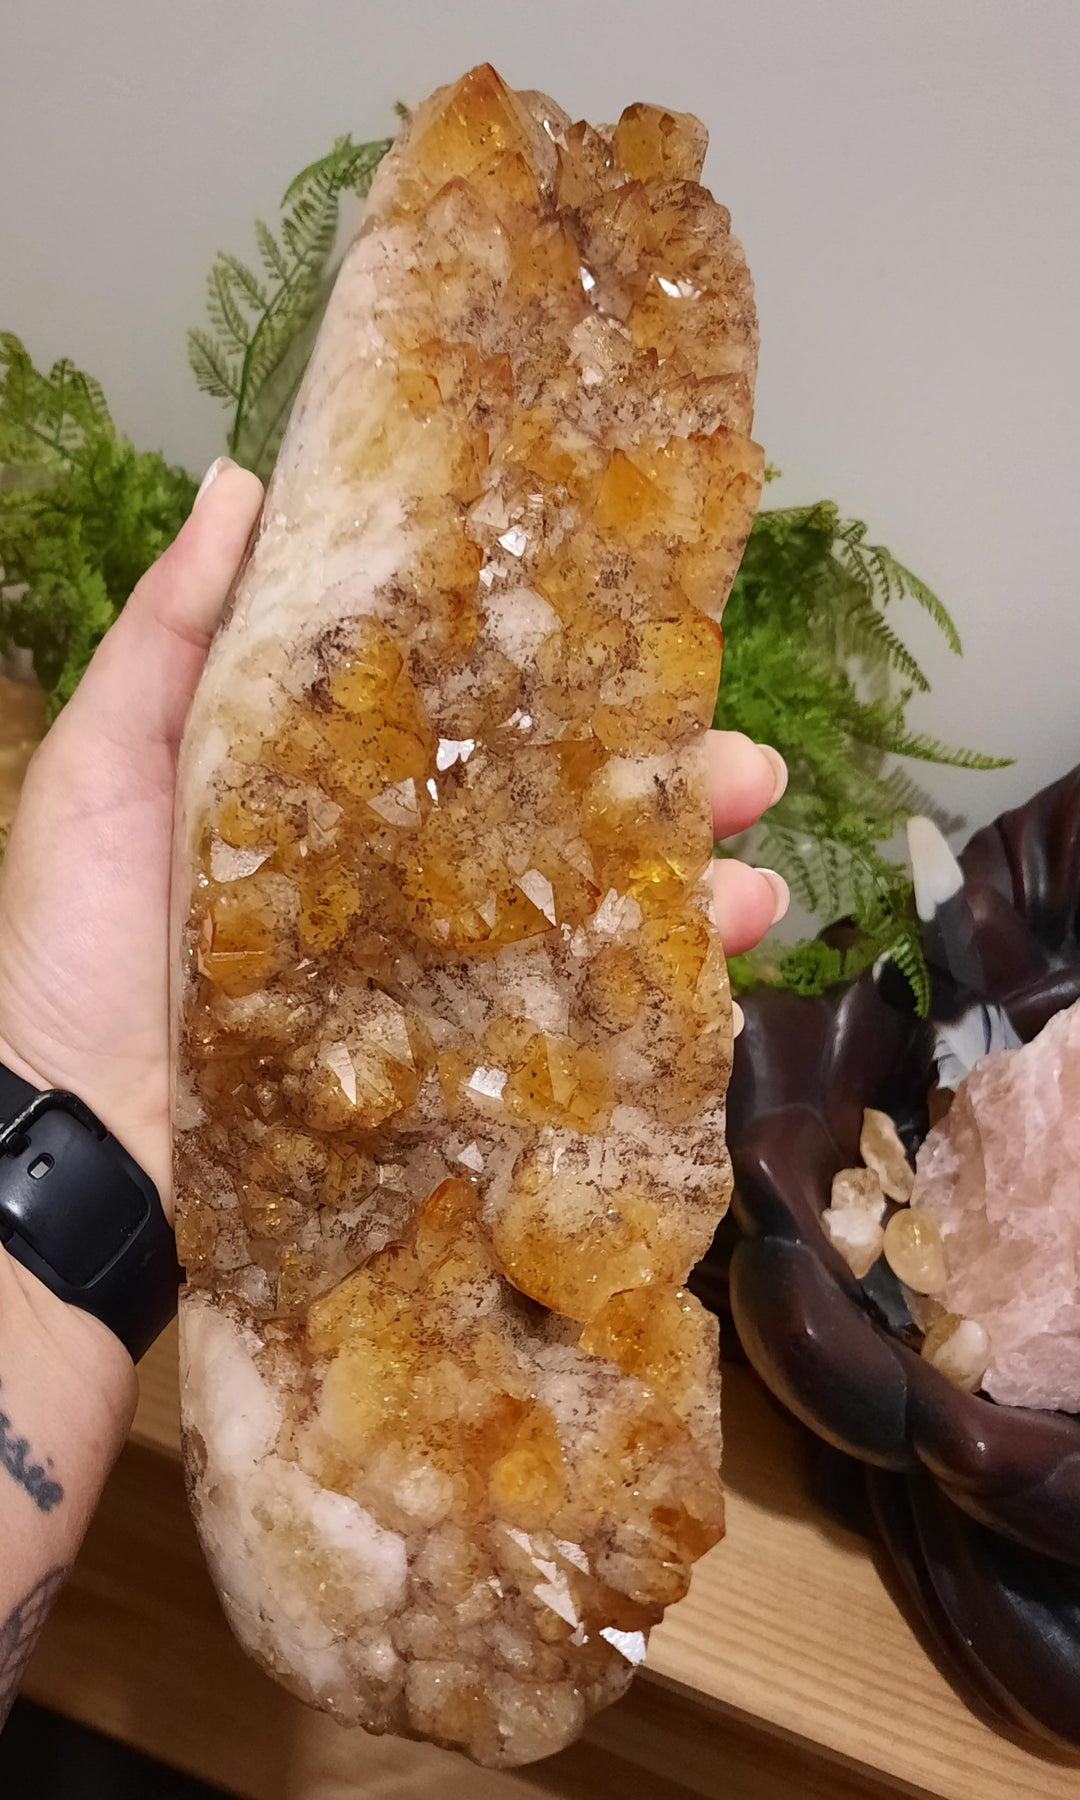 Citrine Cluster With Stand STZ322